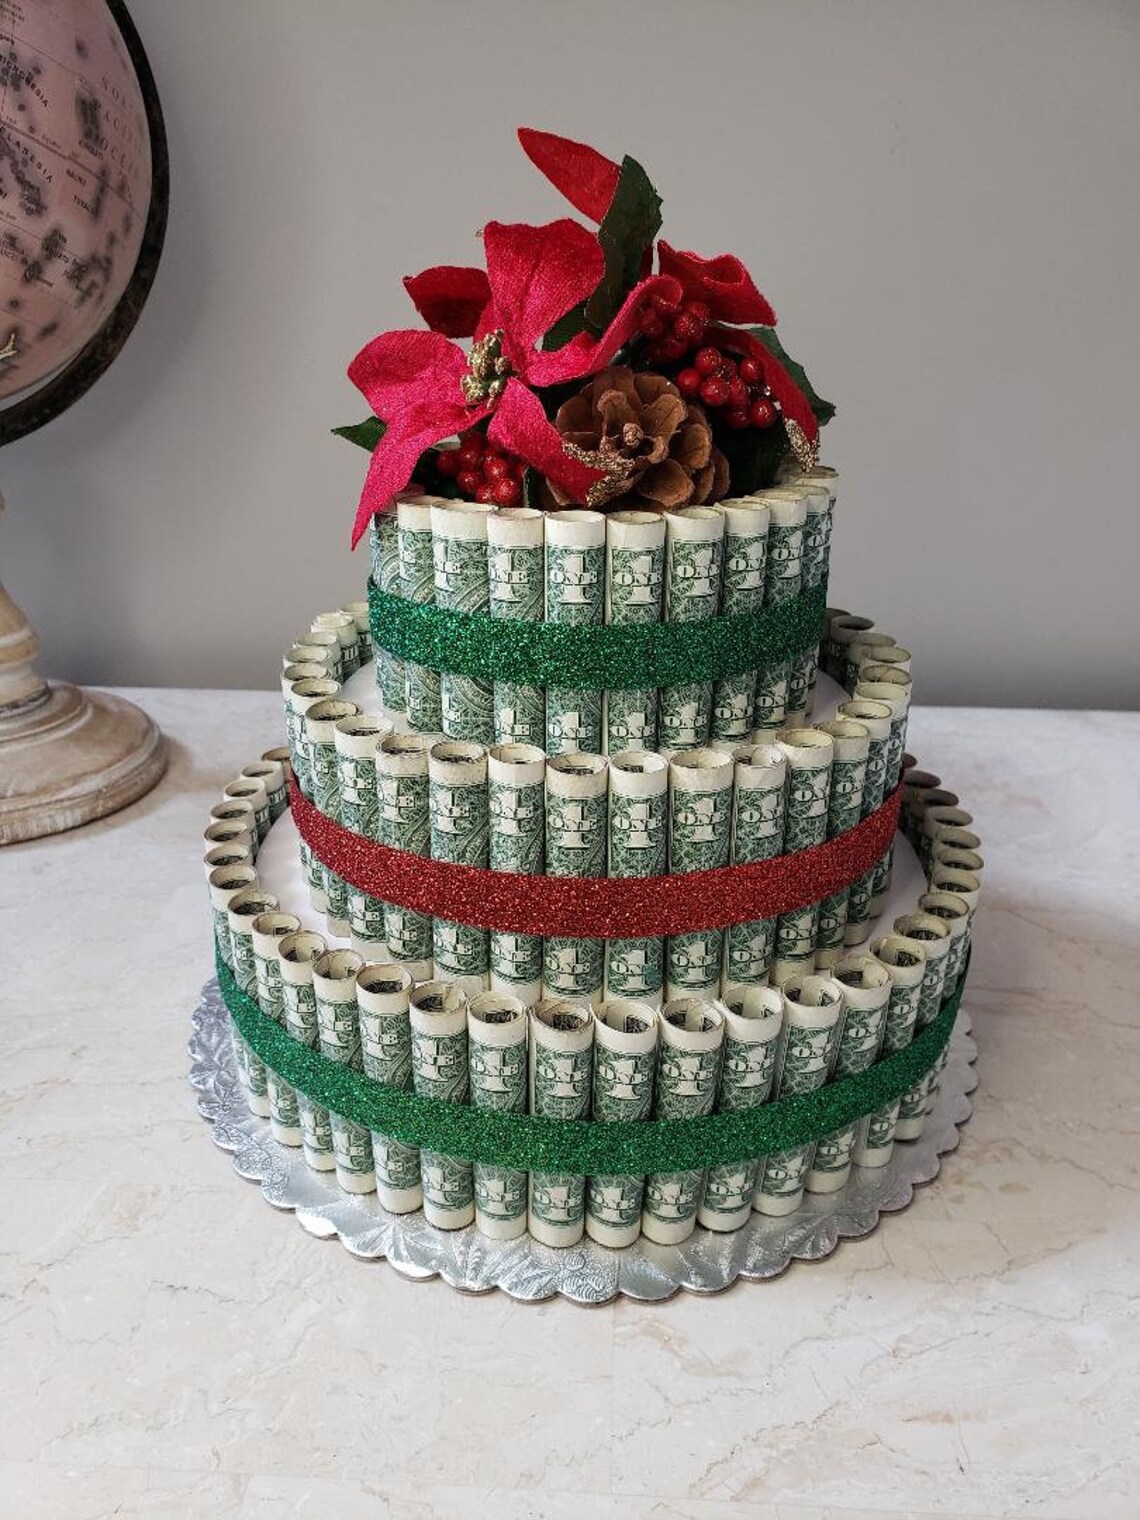 Christmas Cash Cake Three Tier Money Cake Red and Green | Etsy